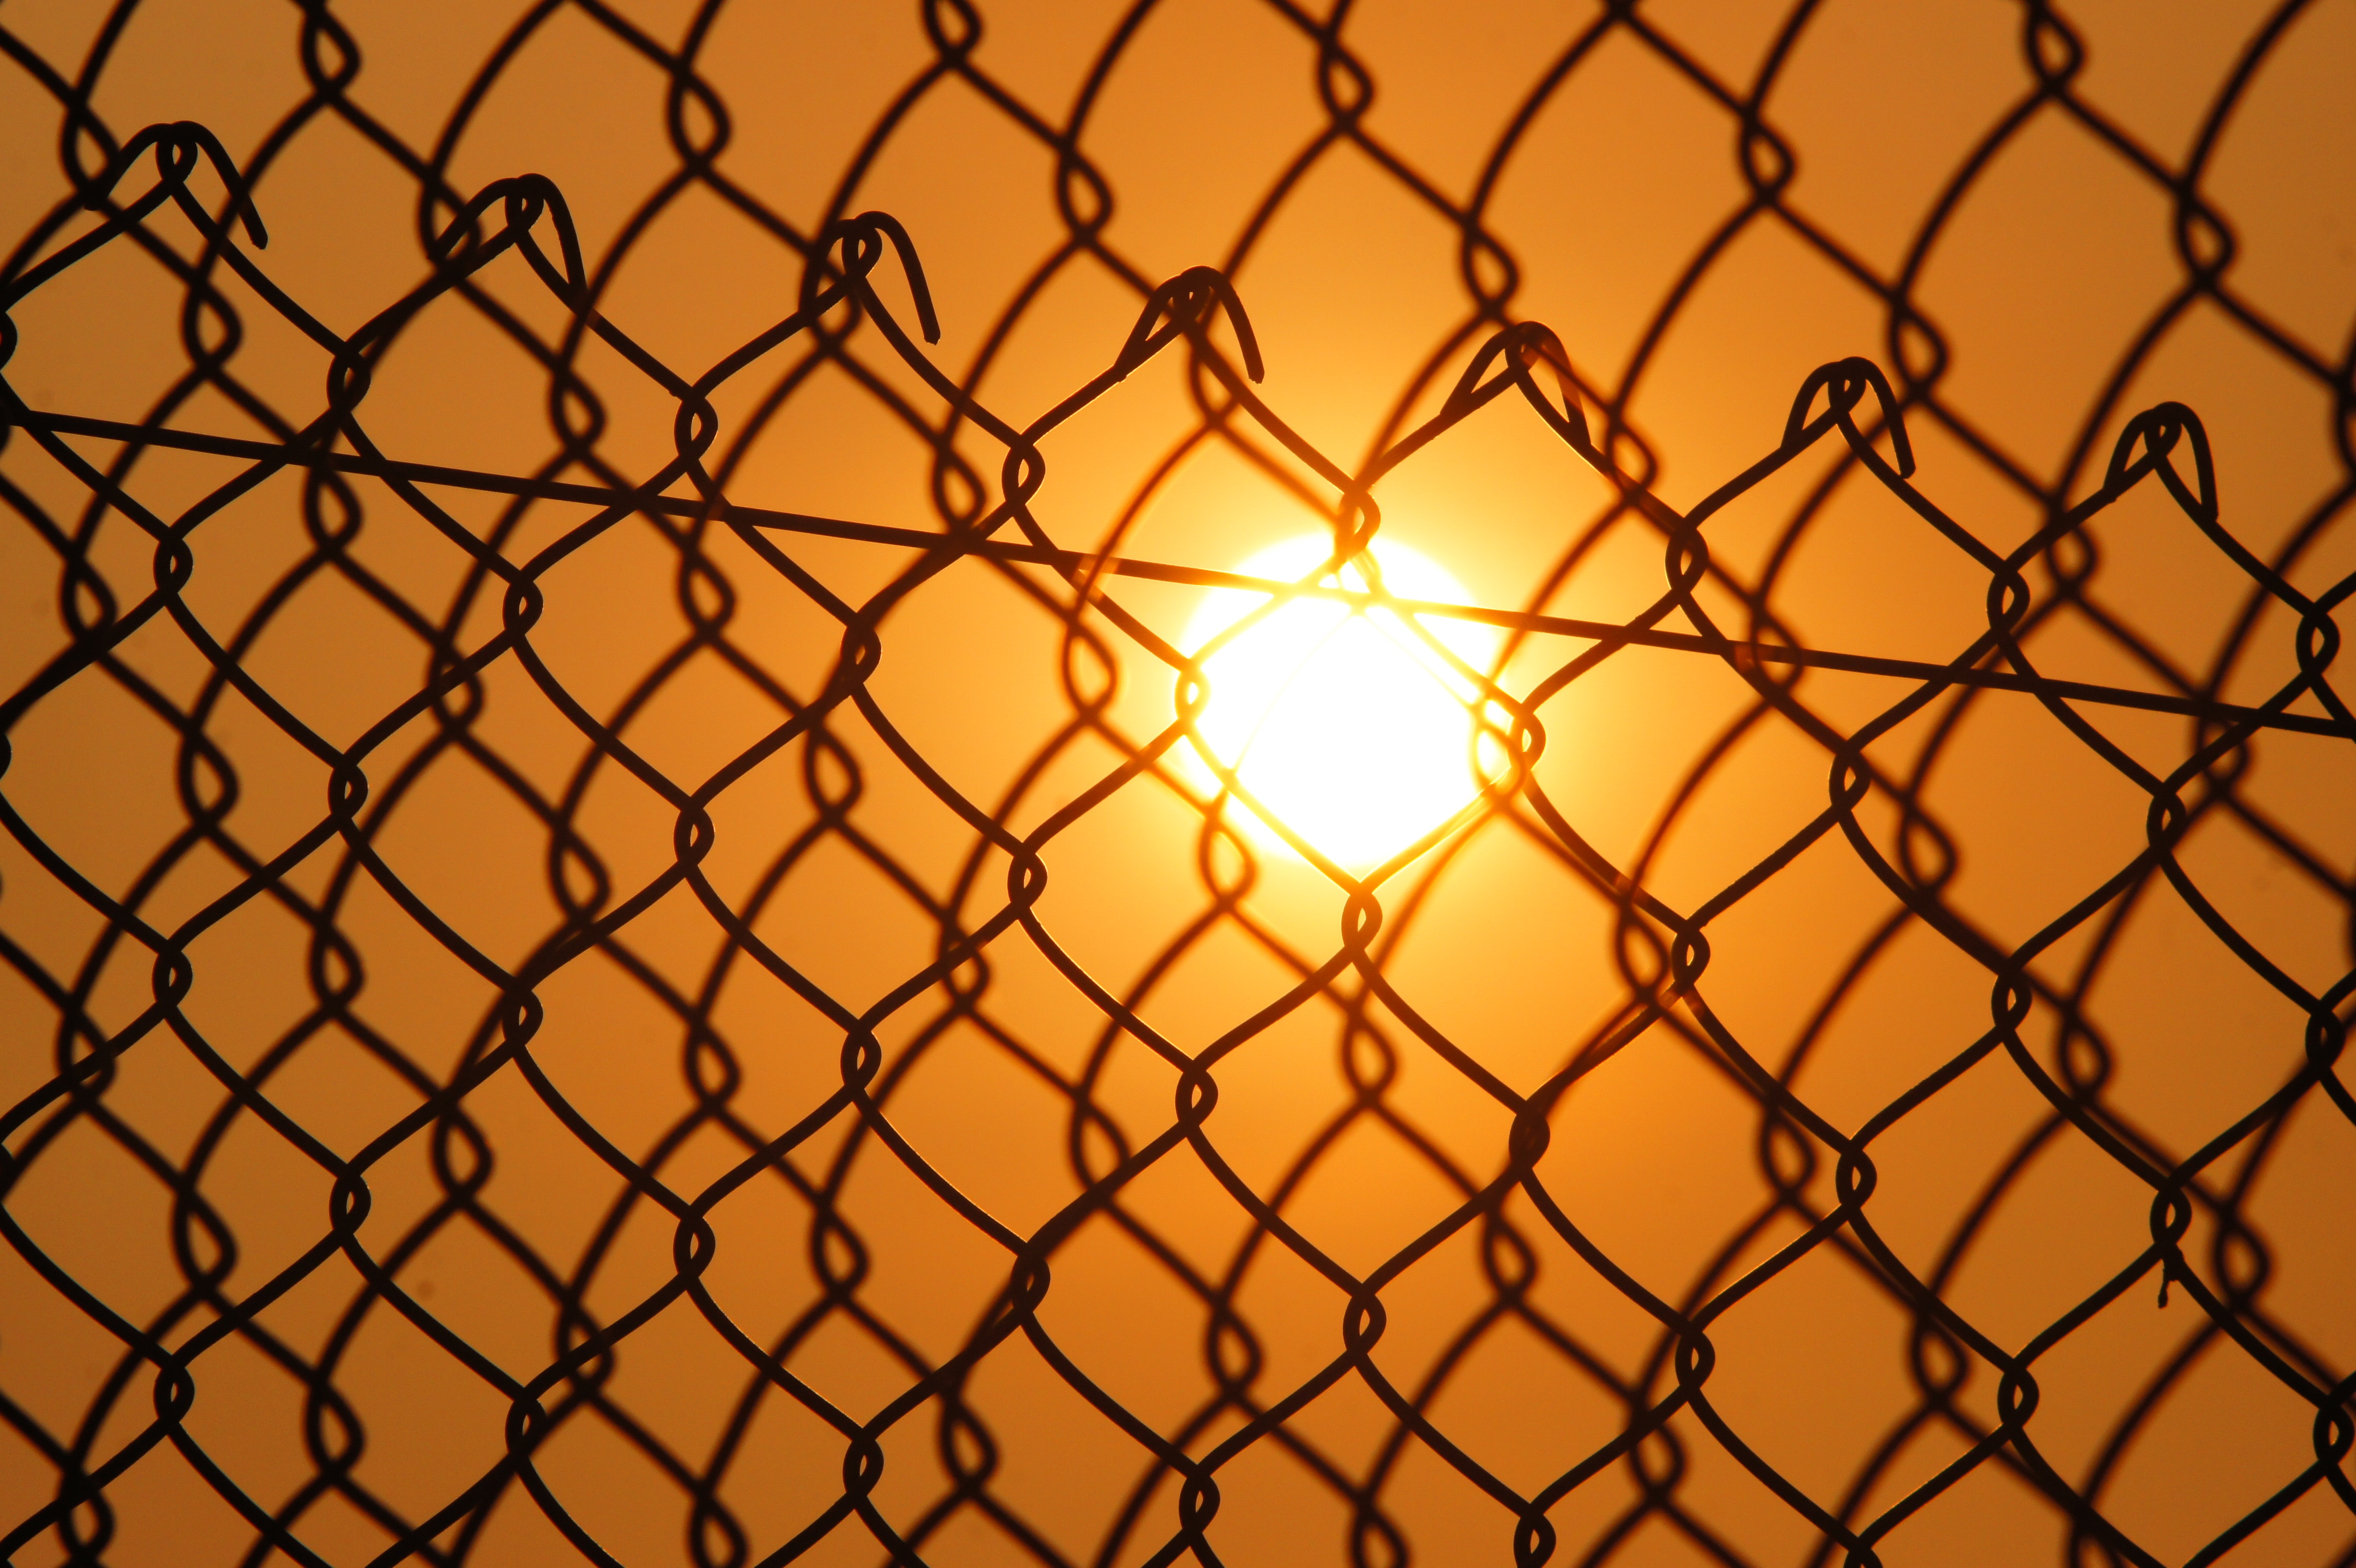 Sun over the cyclone fence photo